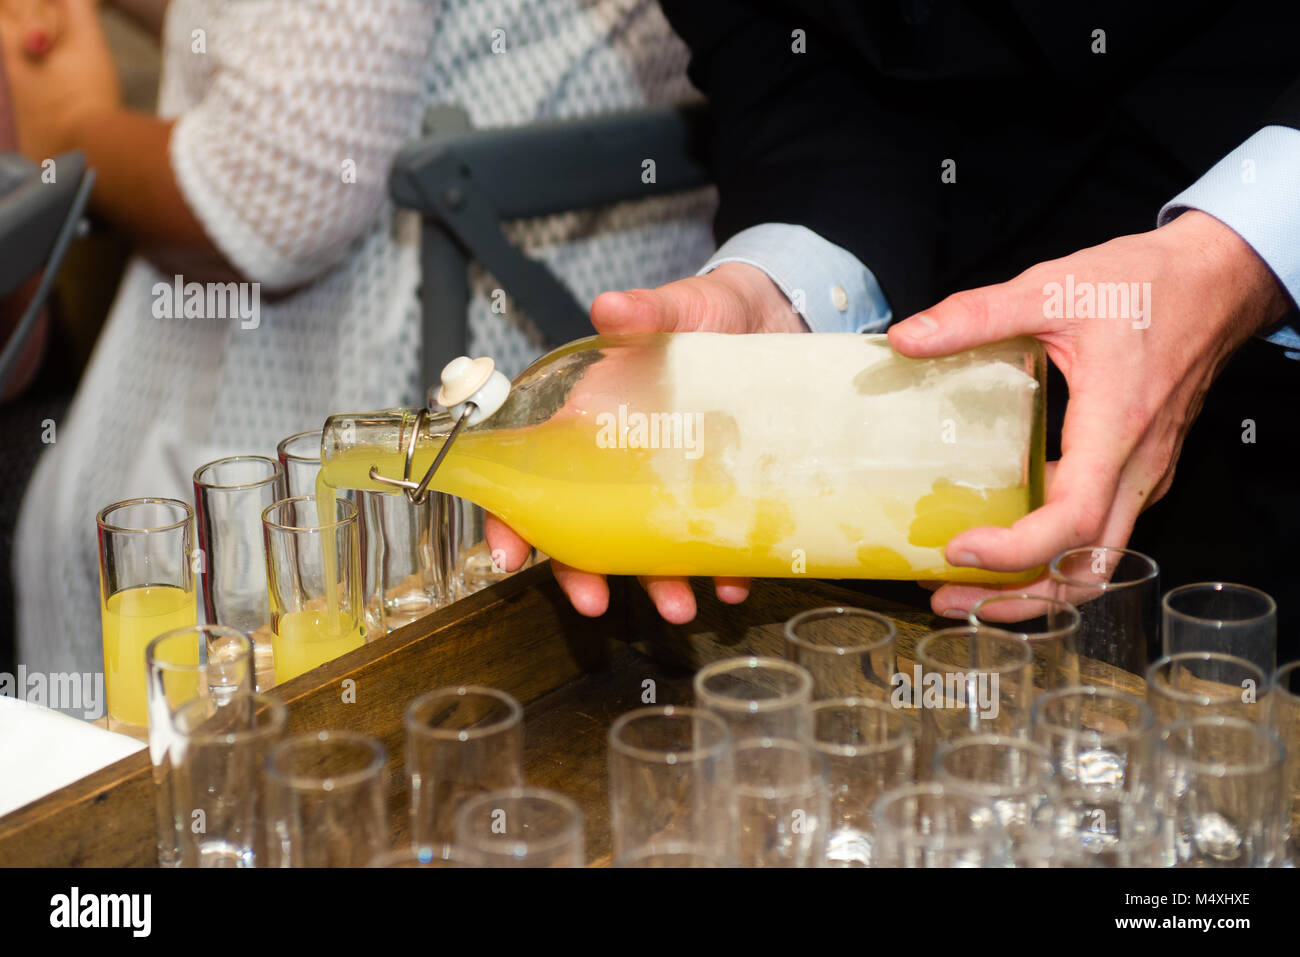 https://c8.alamy.com/comp/M4XHXE/close-up-of-a-waiter-serving-limoncello-in-glasses-at-a-party-M4XHXE.jpg